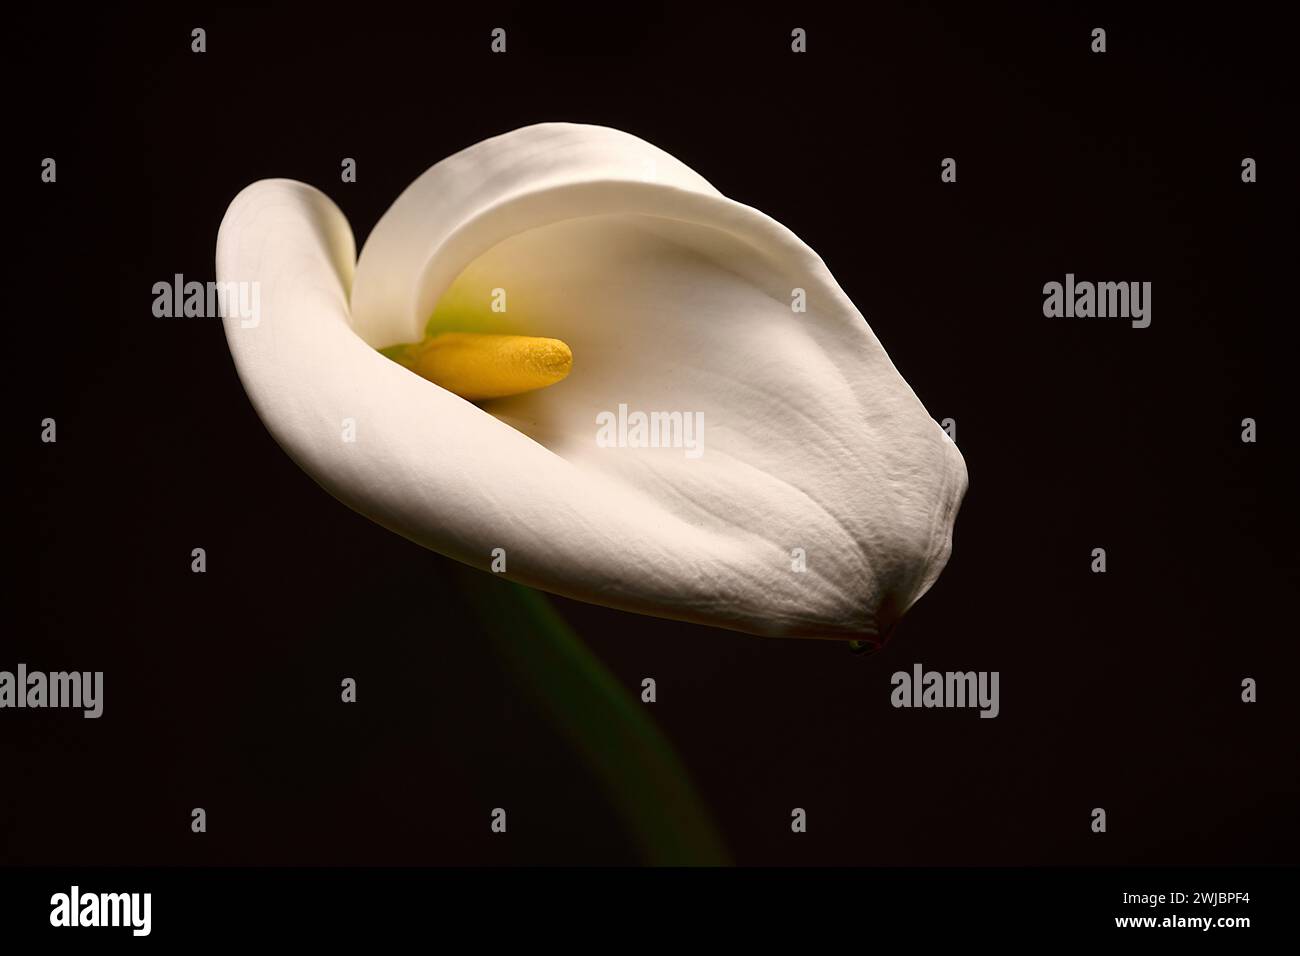 White delicate calla lily flowers on black background, death lily flower condolence card, funeral concept image Stock Photo